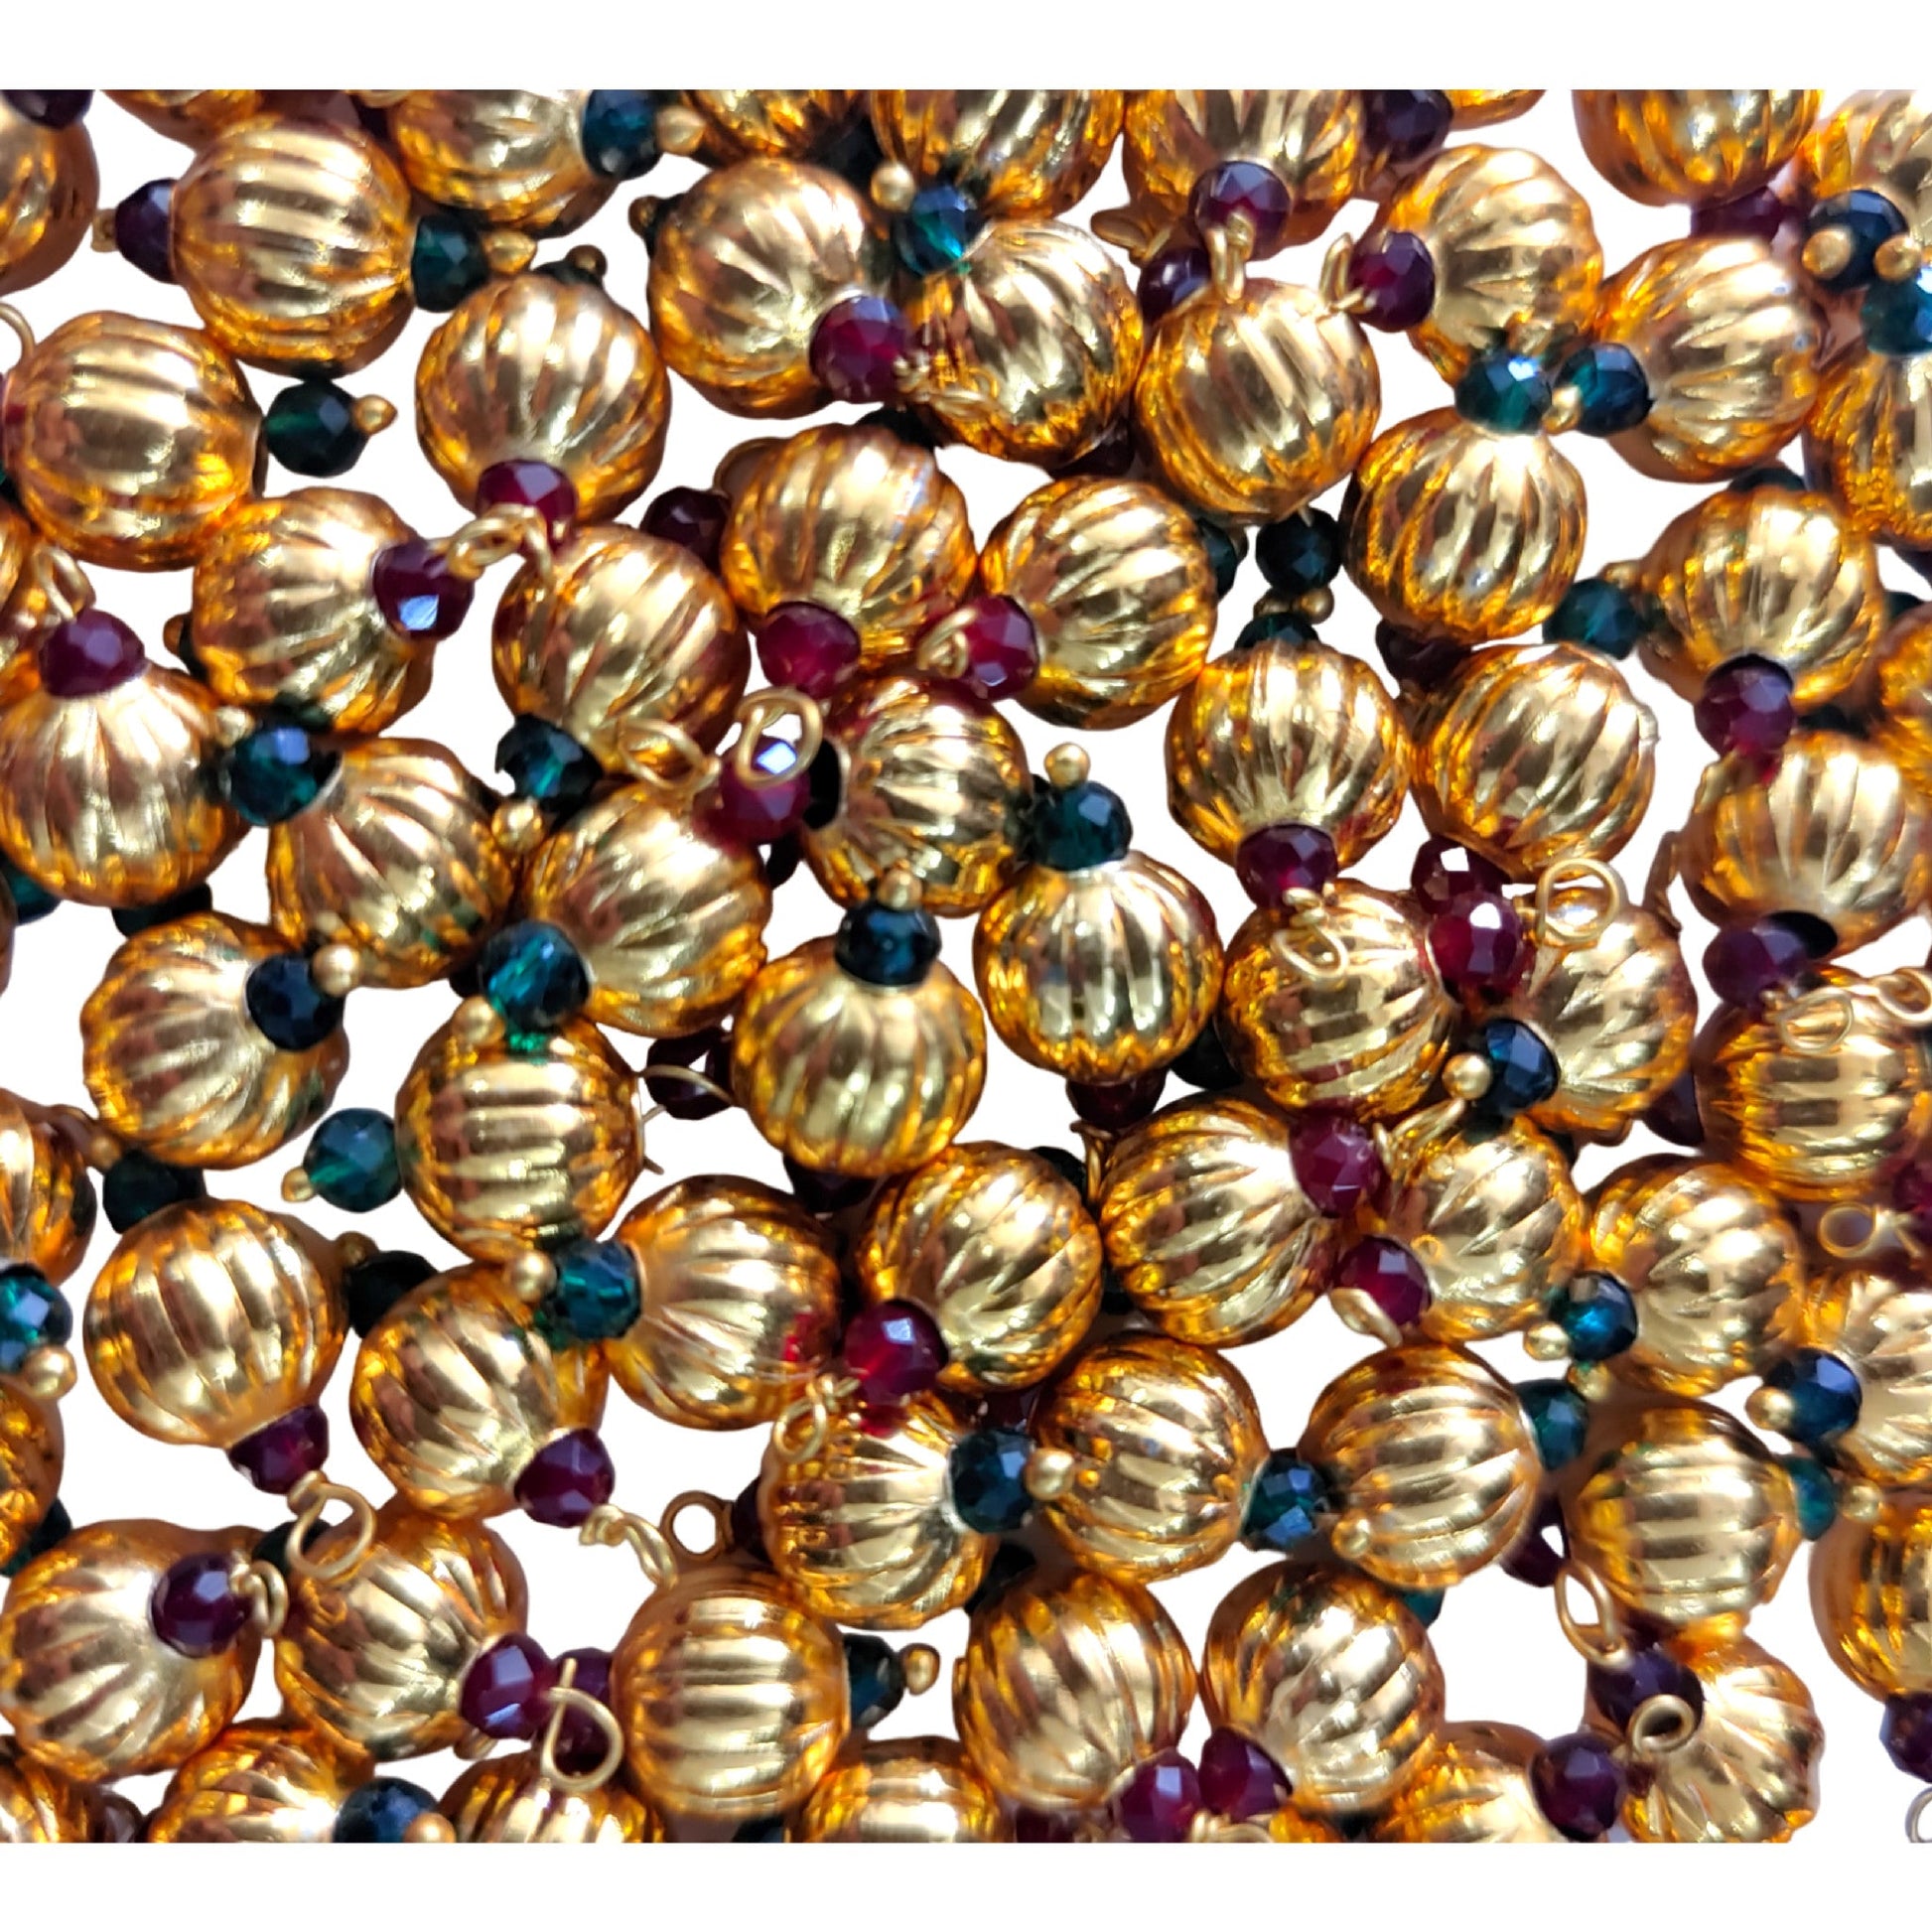 Indian Petals Kharbuja Bead with Drop Shaped Metal Beads Ideal for Jewelry designing & Craft Making, 8mm Metal Ball